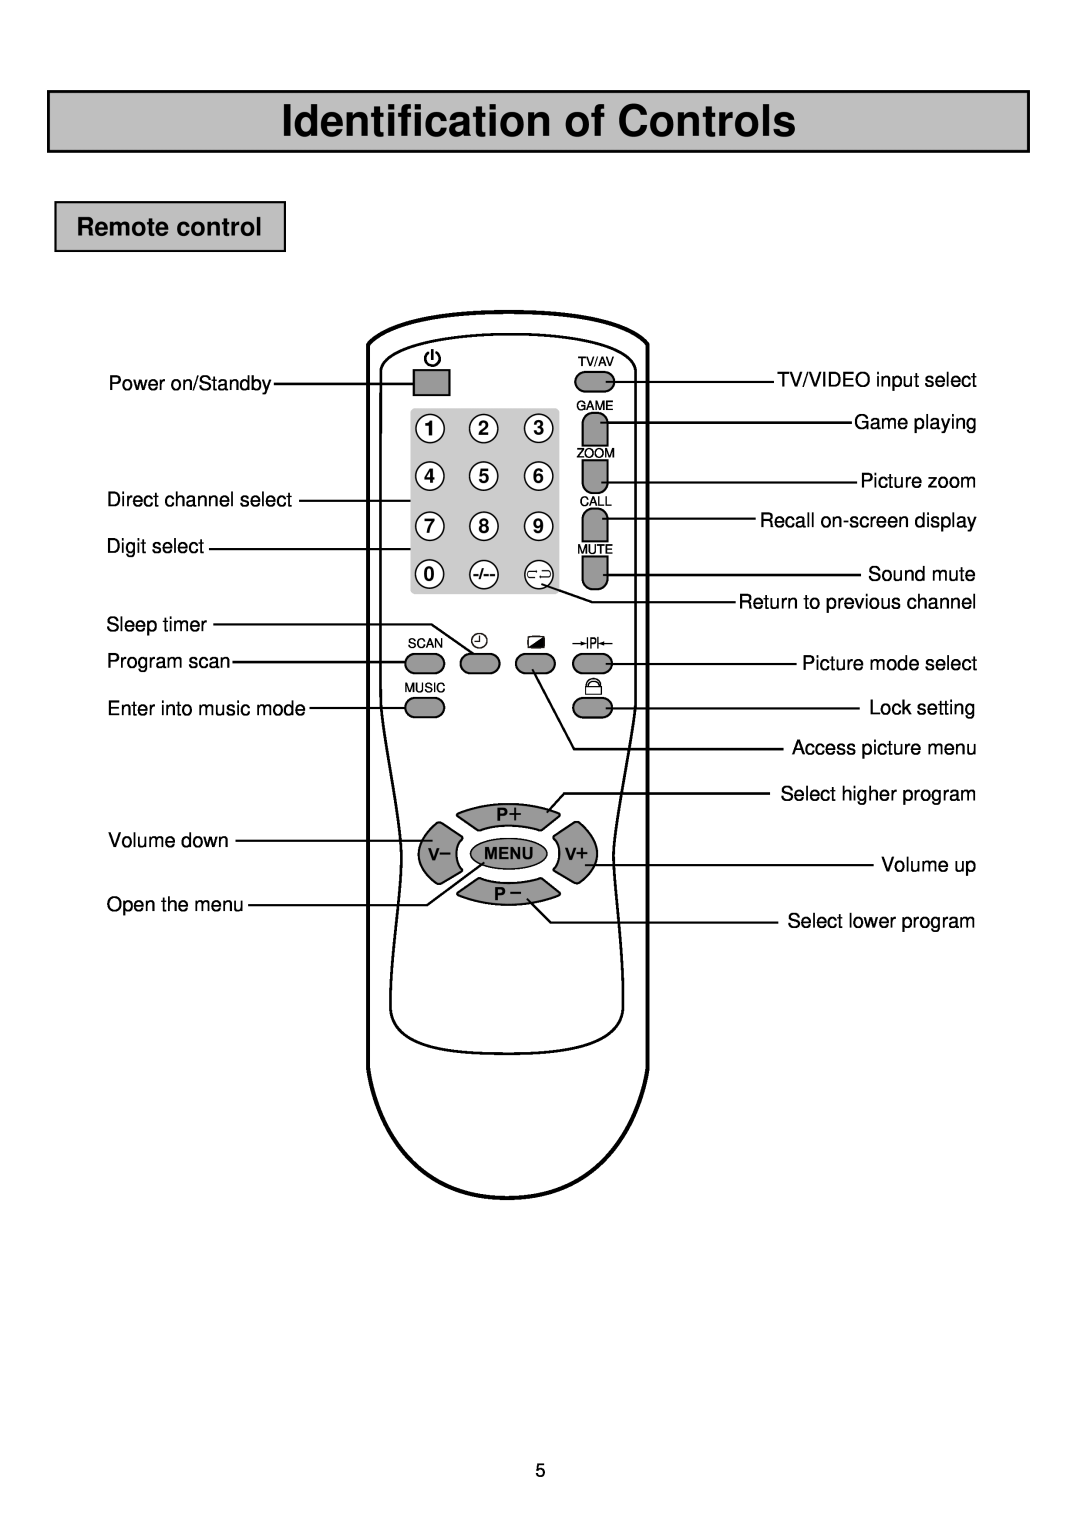 Palsonic 6835TK owner manual Identification of Controls, Remote control, Direct channel select, Digit select 